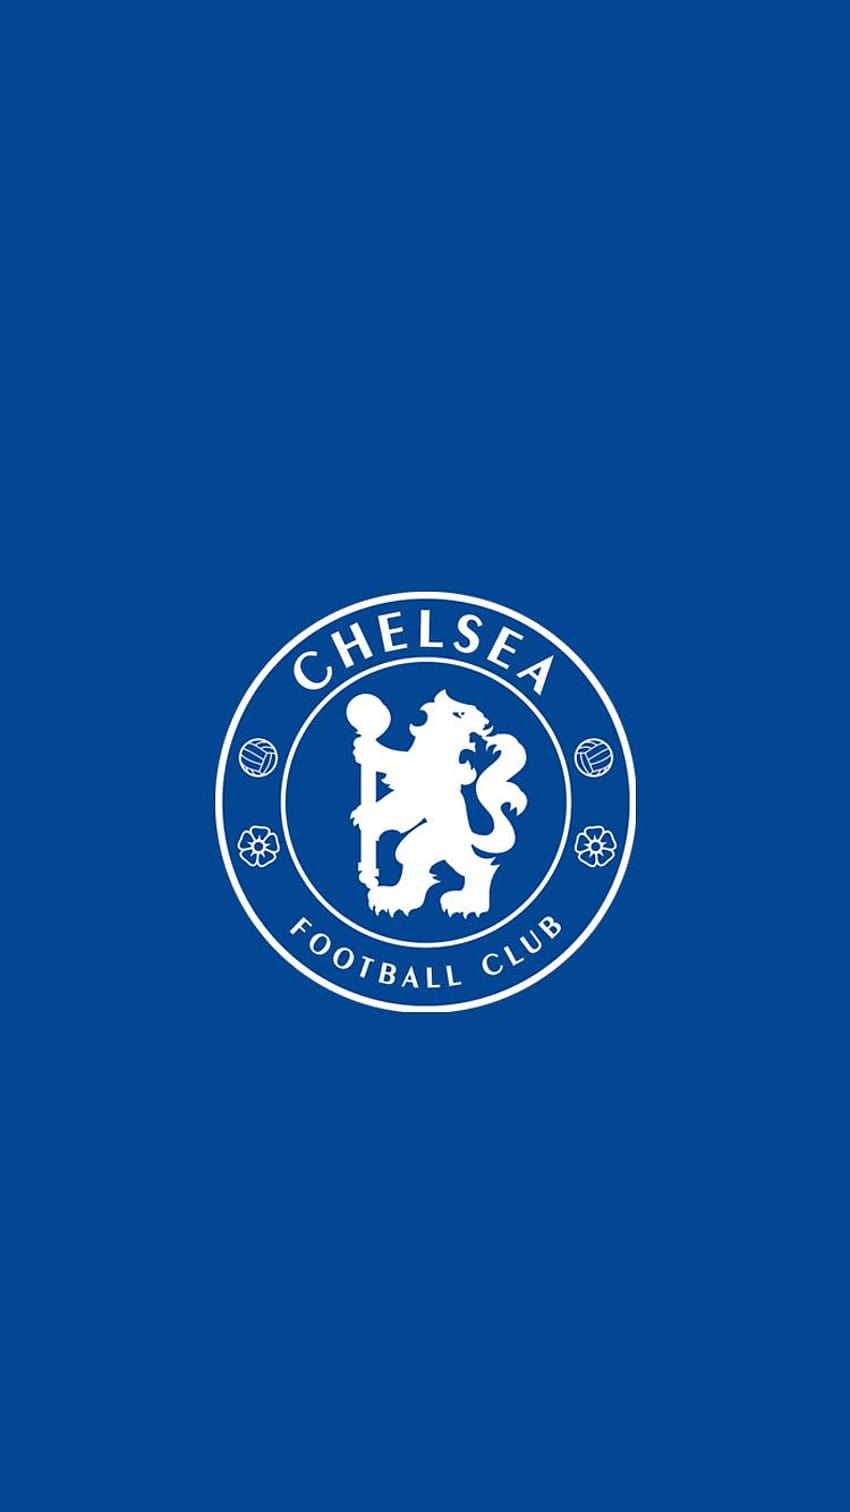 Chelsea Third Kit wallpaper by FF471  Download on ZEDGE  c079